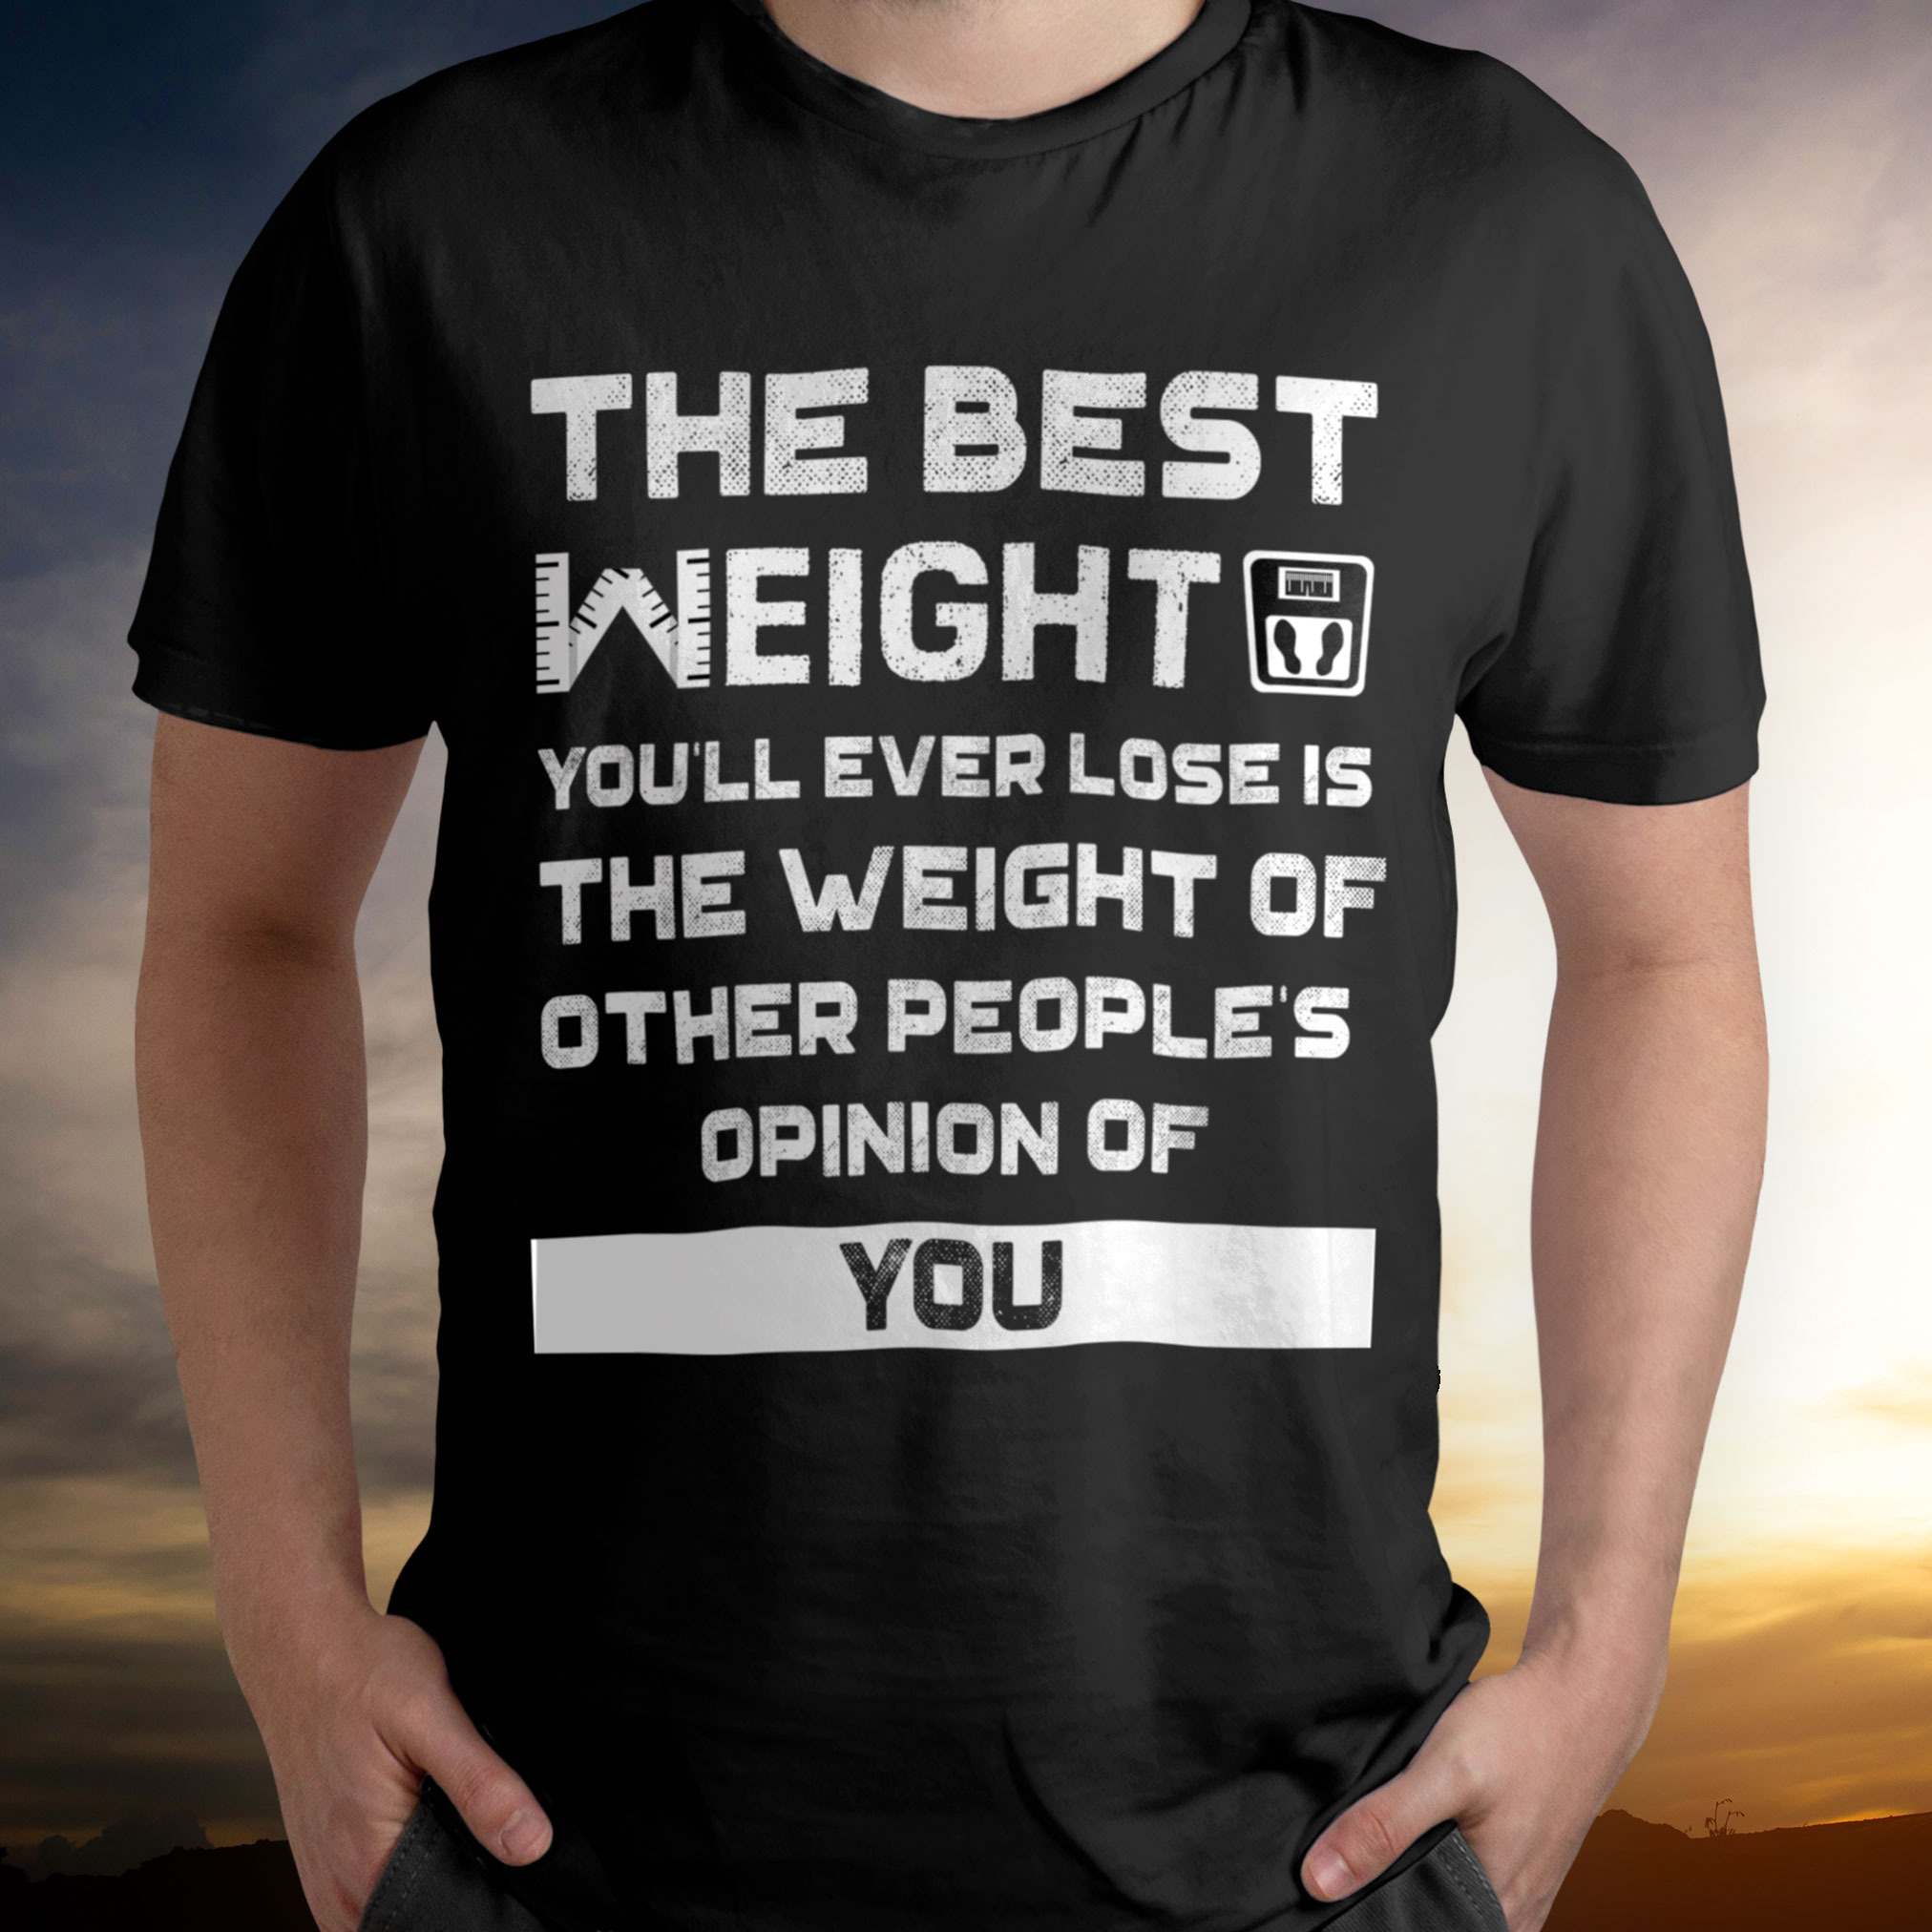 The best weight you'll ever lose is the weight of other people's opinion of you